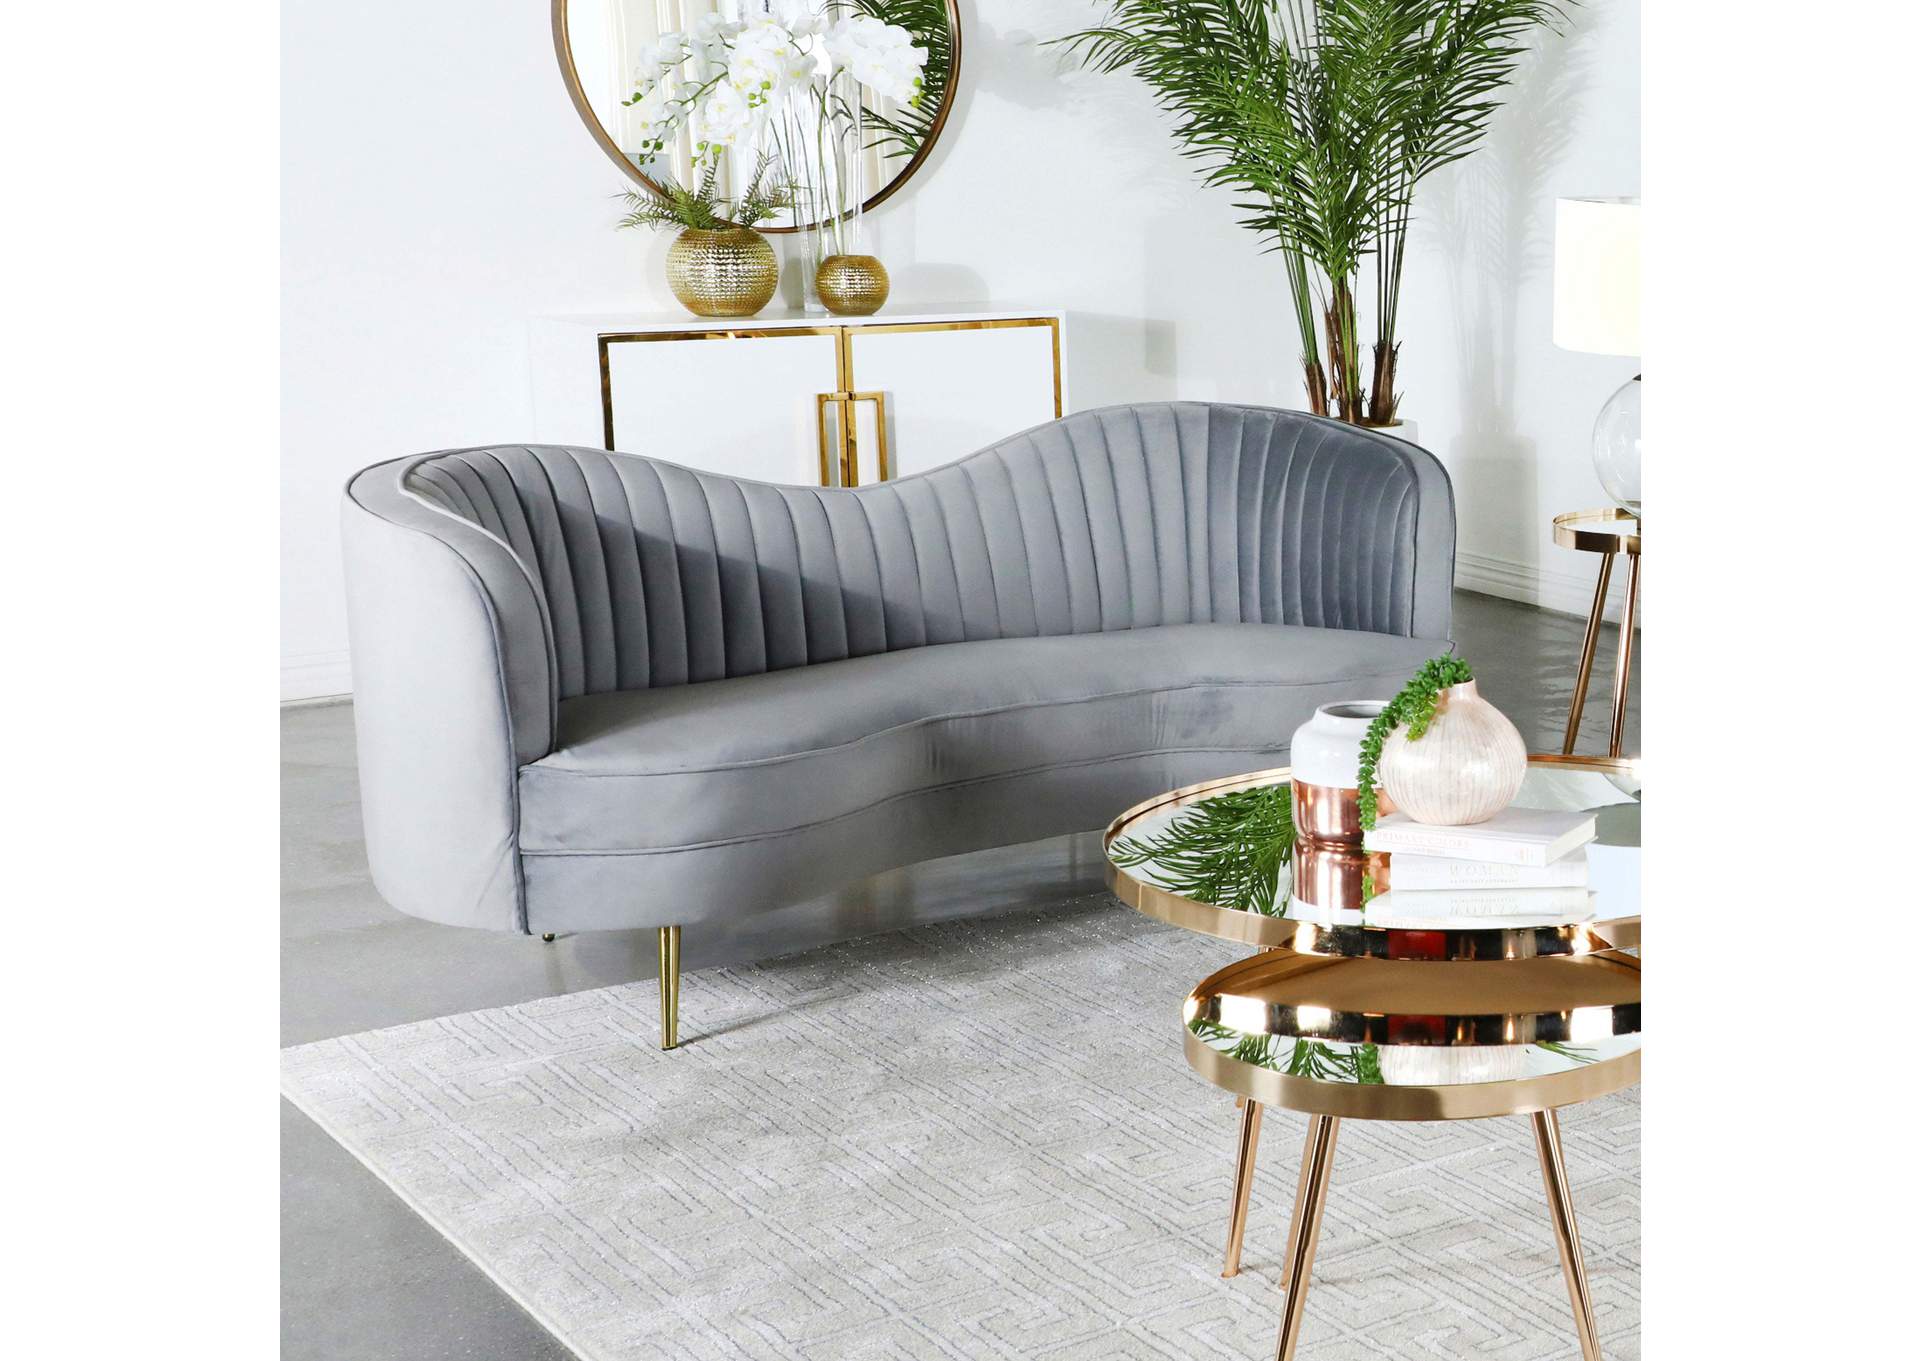 Sophia Upholstered Loveseat with Camel Back Grey and Gold,Coaster Furniture